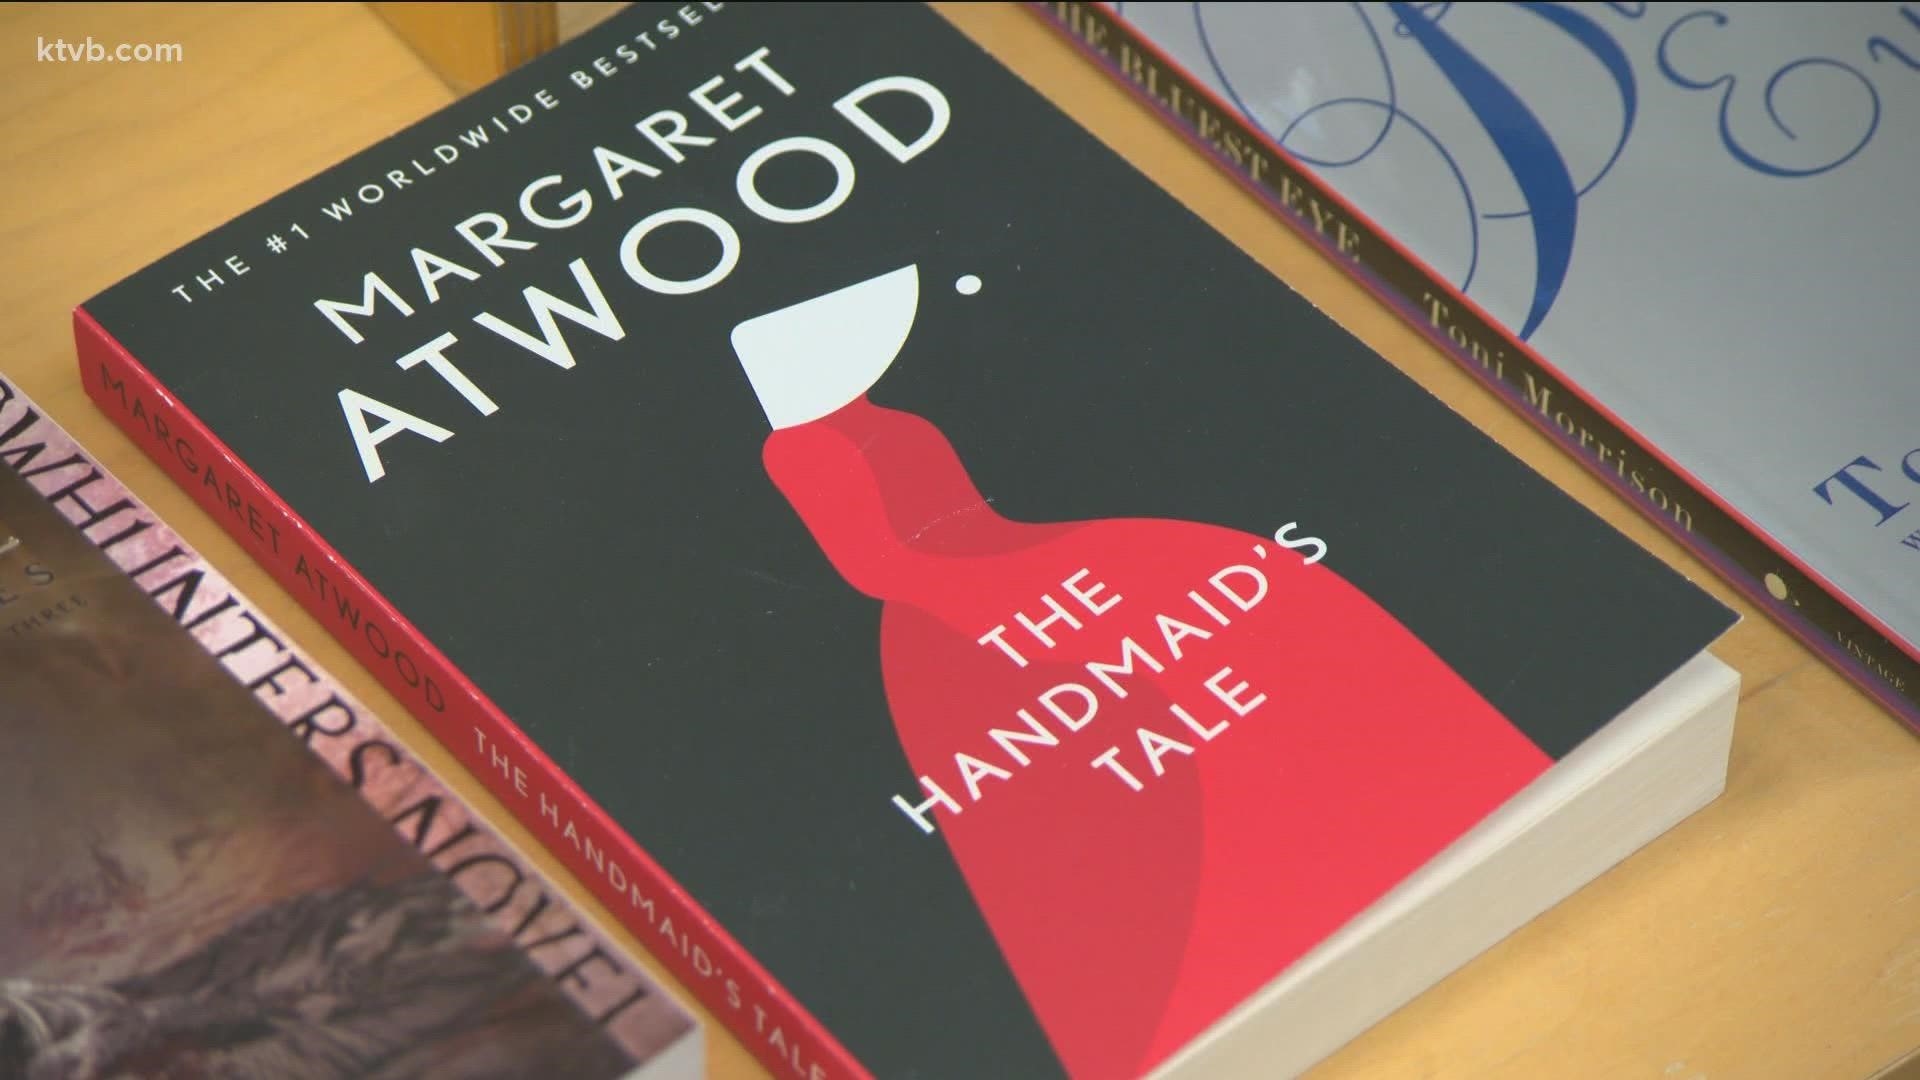 The list of banned books includes "The Handmaid’s Tale” by Margaret Atwood, “The Bluest Eye” by Toni Morrison, and “Kite Runner” by Khaled Hosseini.